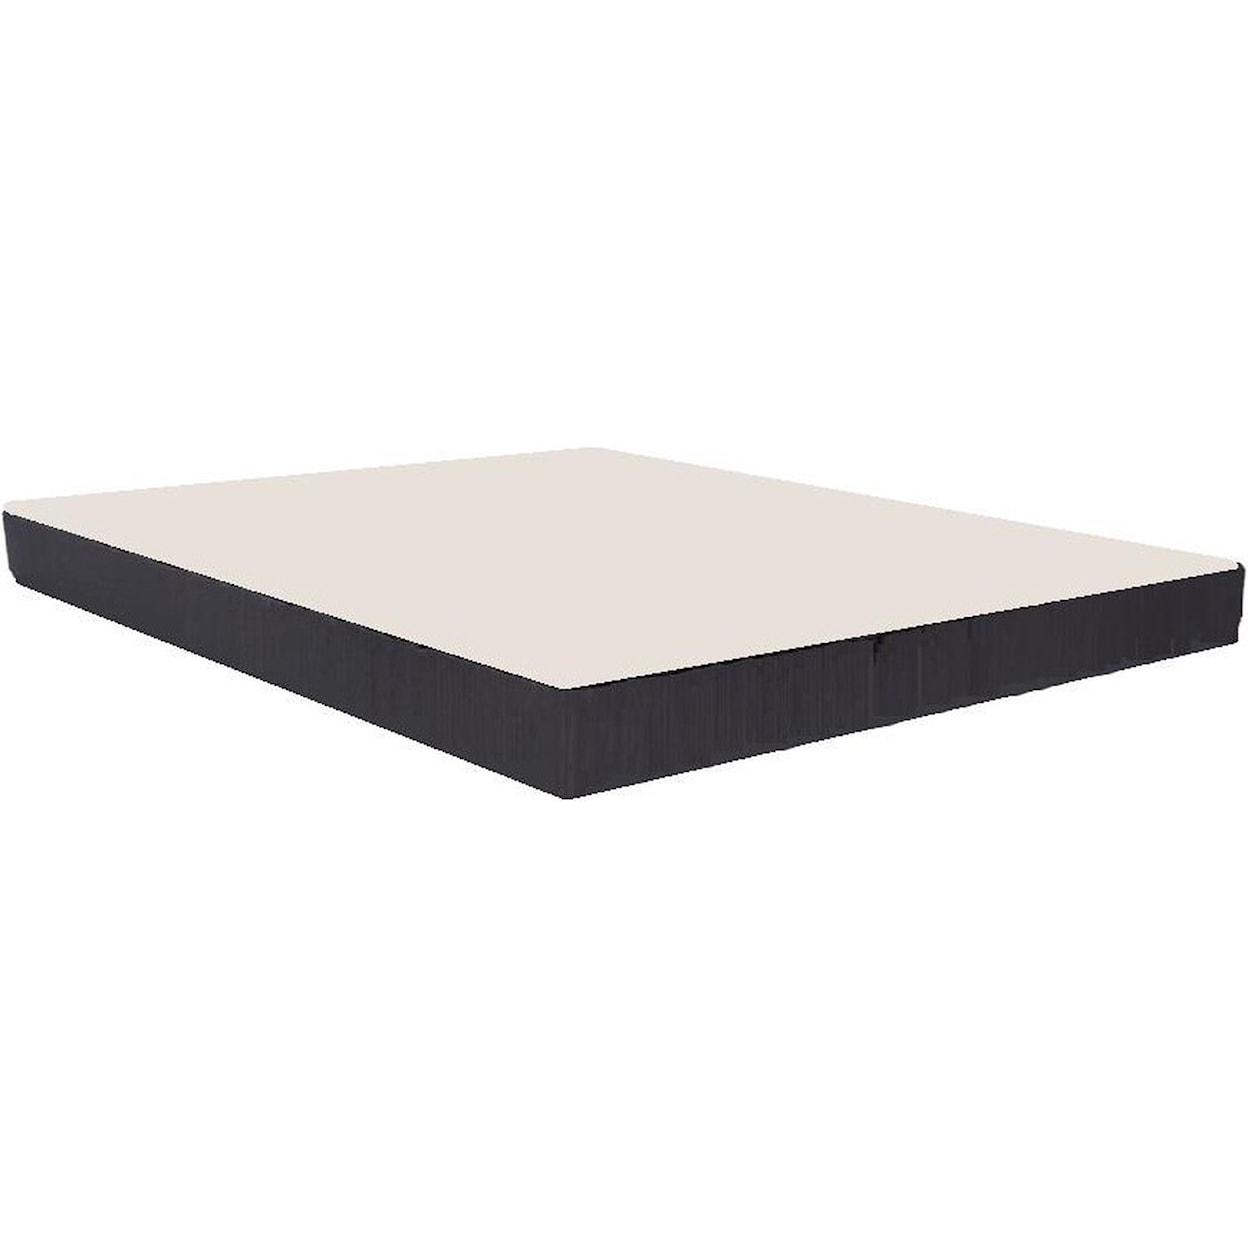 Southerland Bedding Co. Signature Foundations Twin Low Profile Base 5" Height